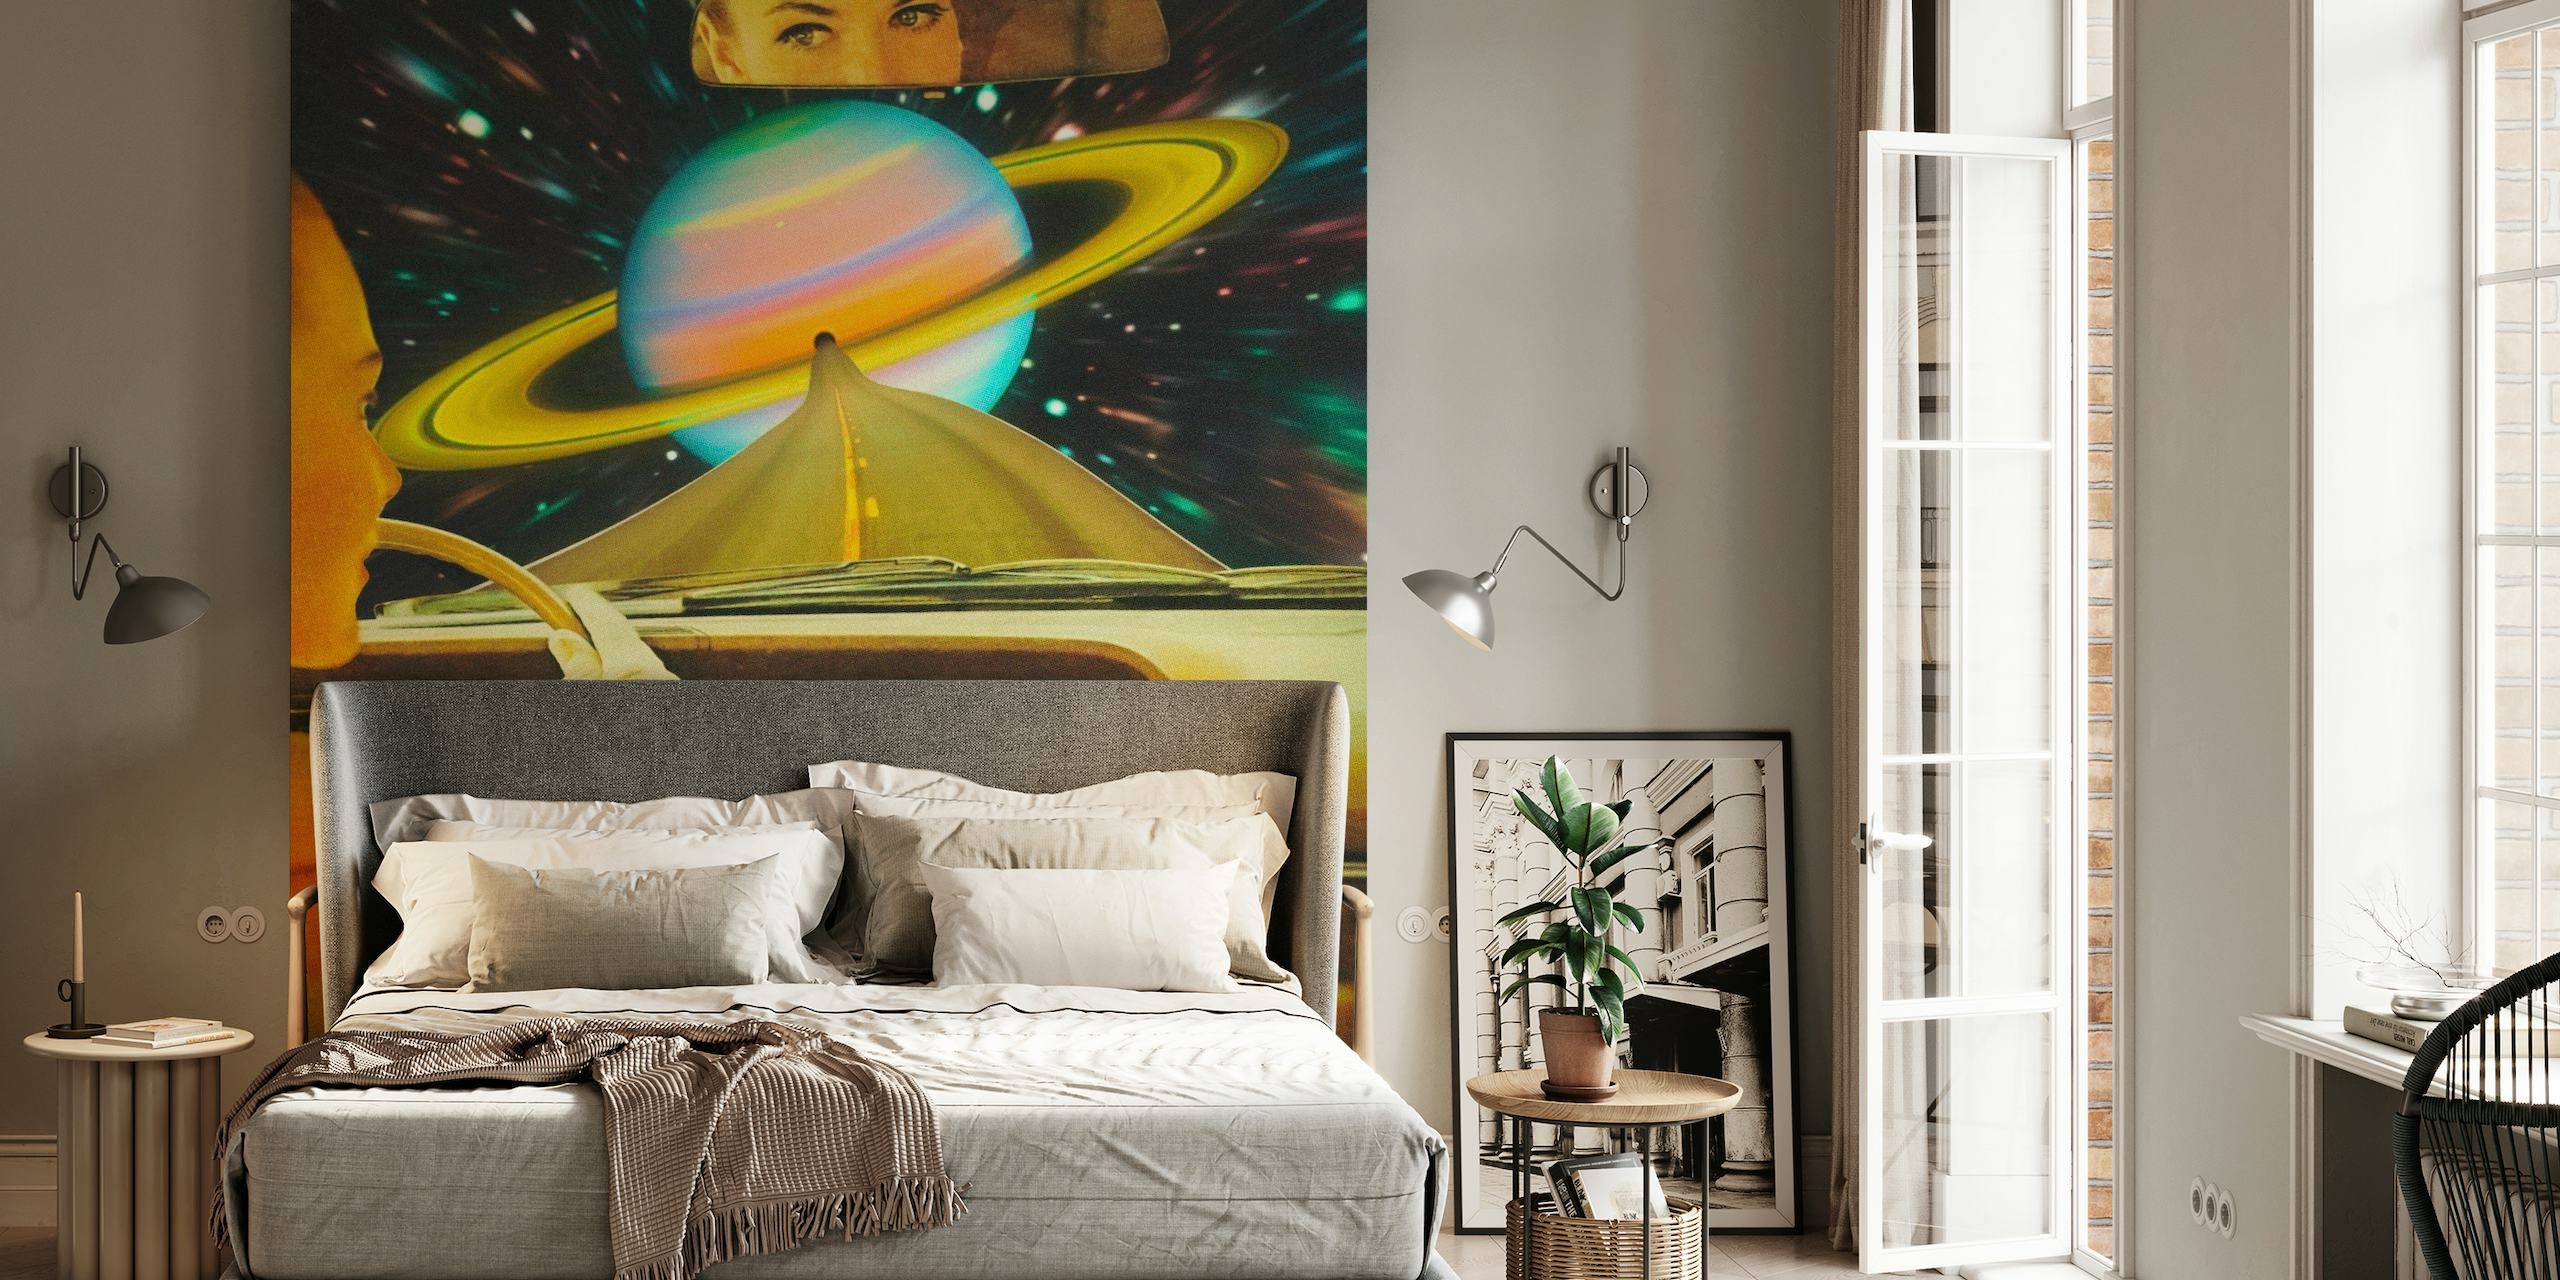 Vintage car interior with a view of Saturn and the stars in a cosmic setting